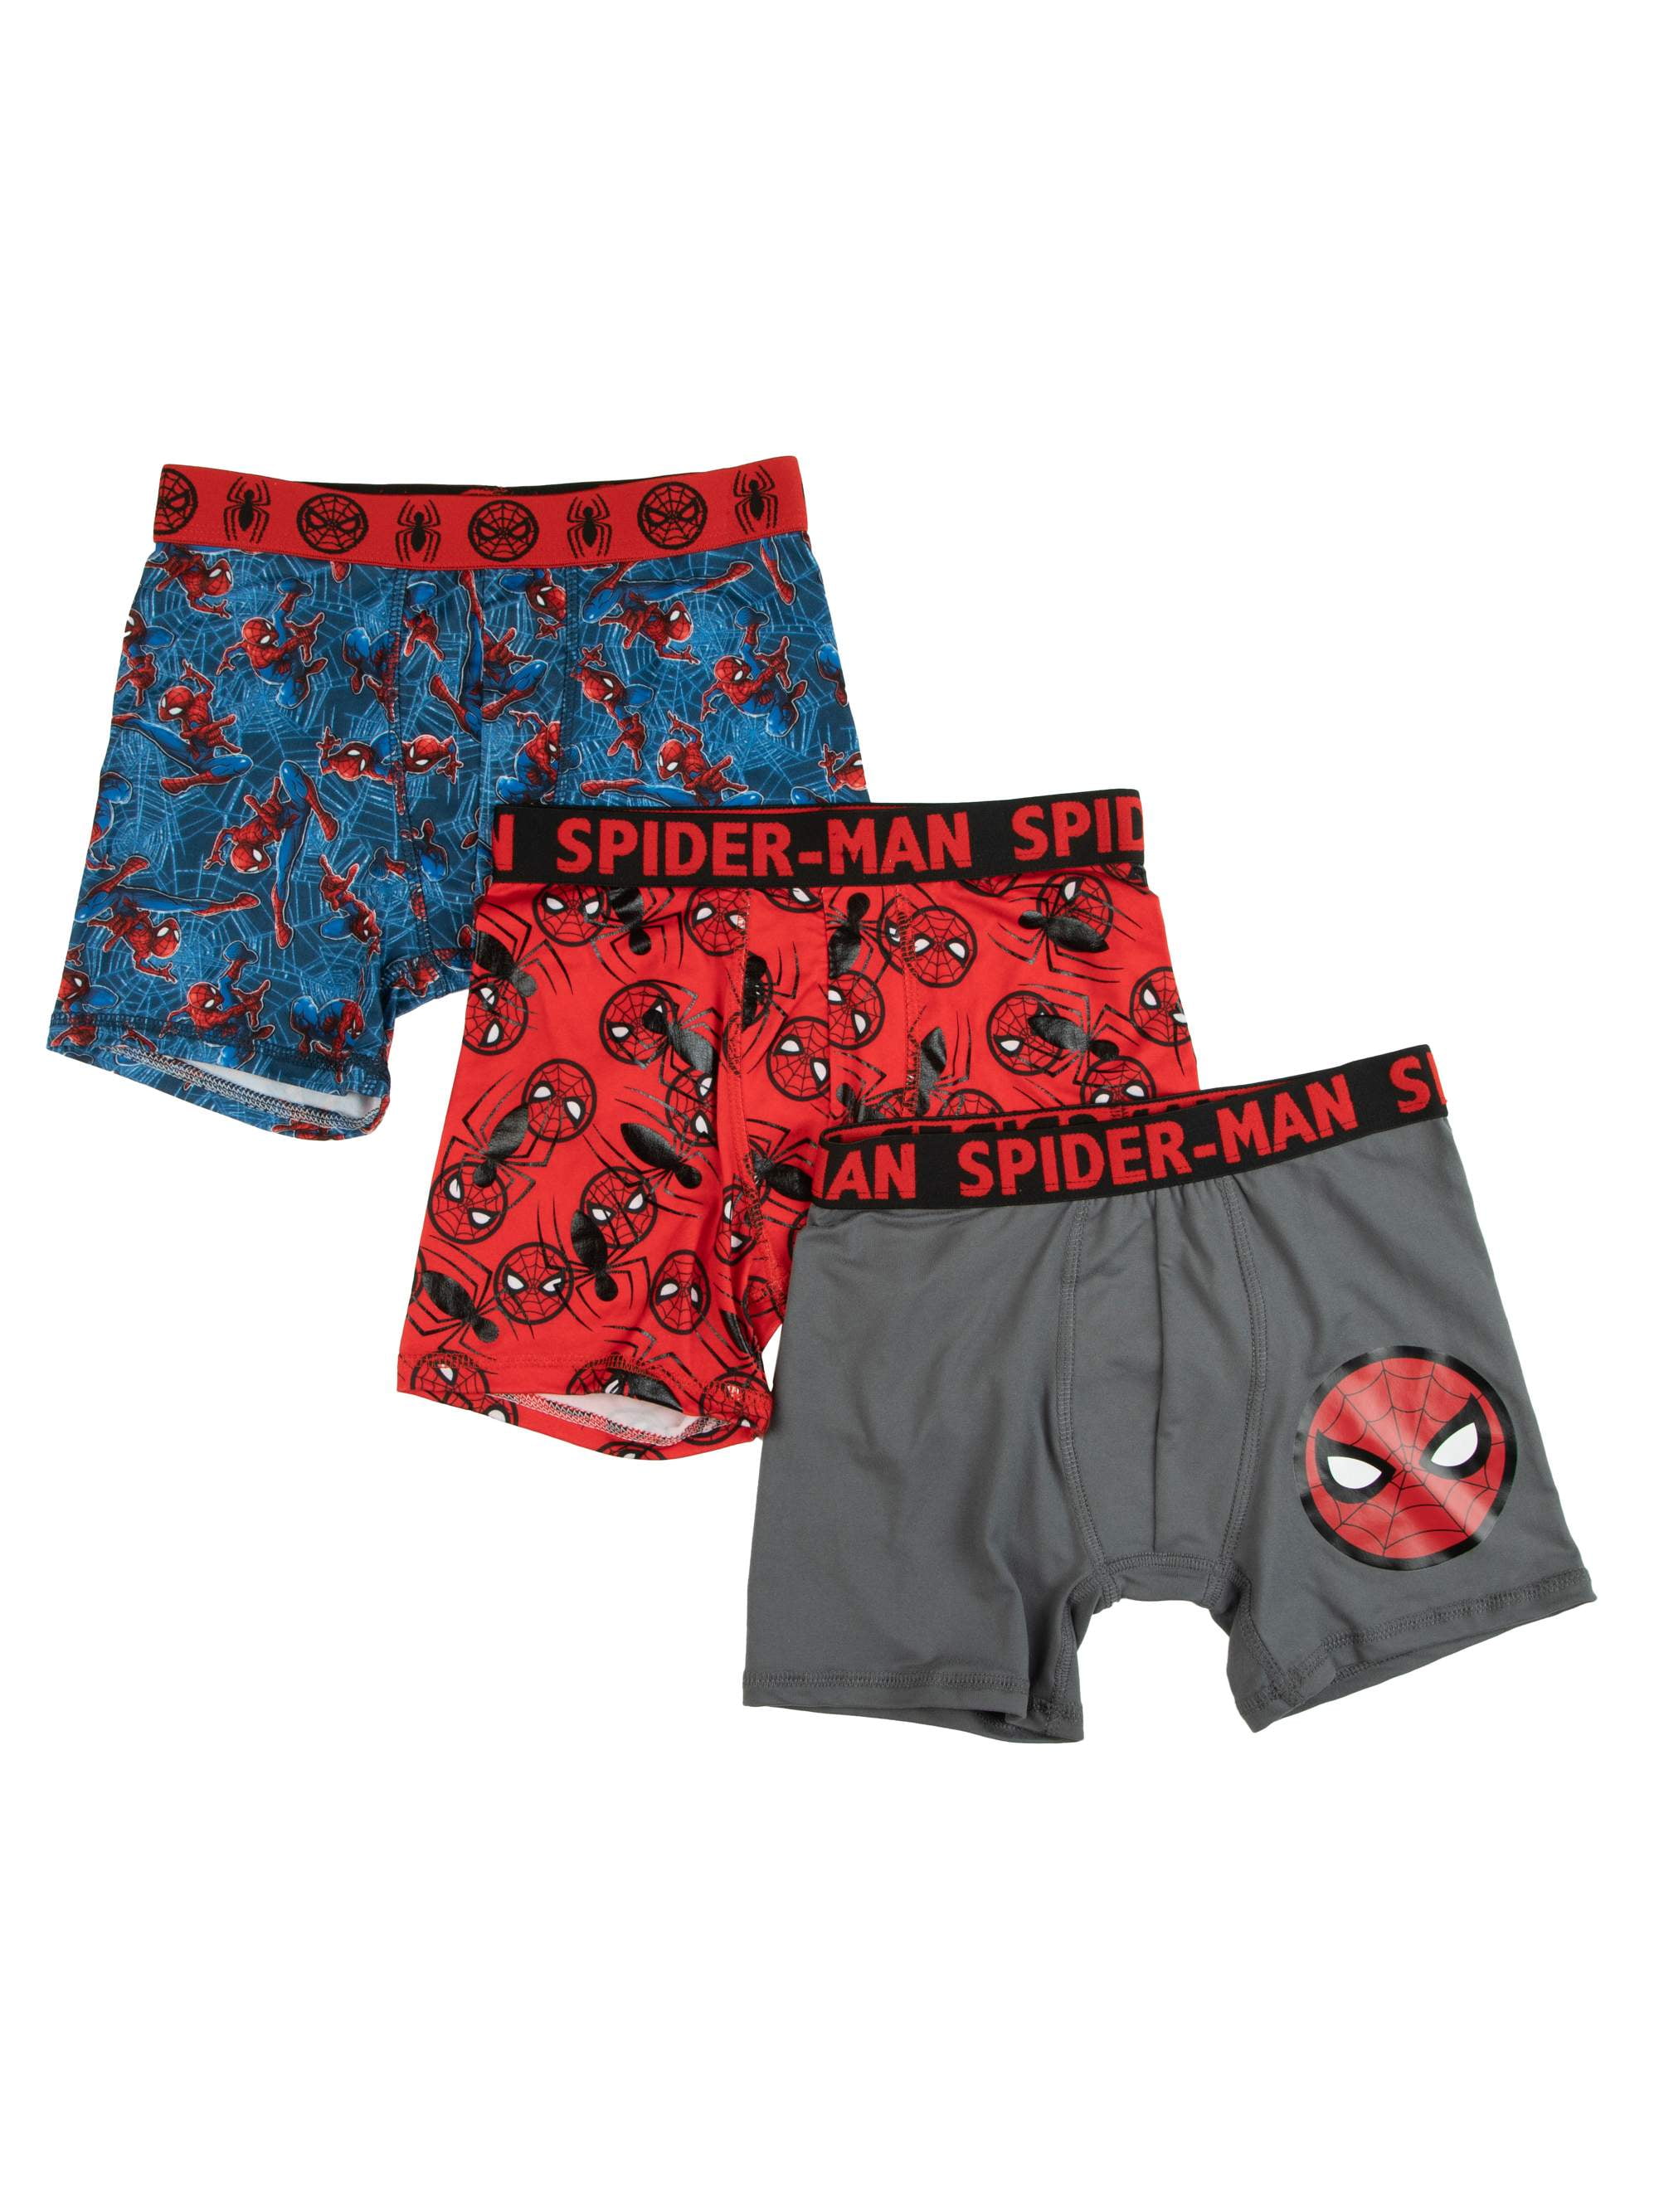 Boys 2 Pack Spiderman Boxer Shorts Age 6-10 yrs 